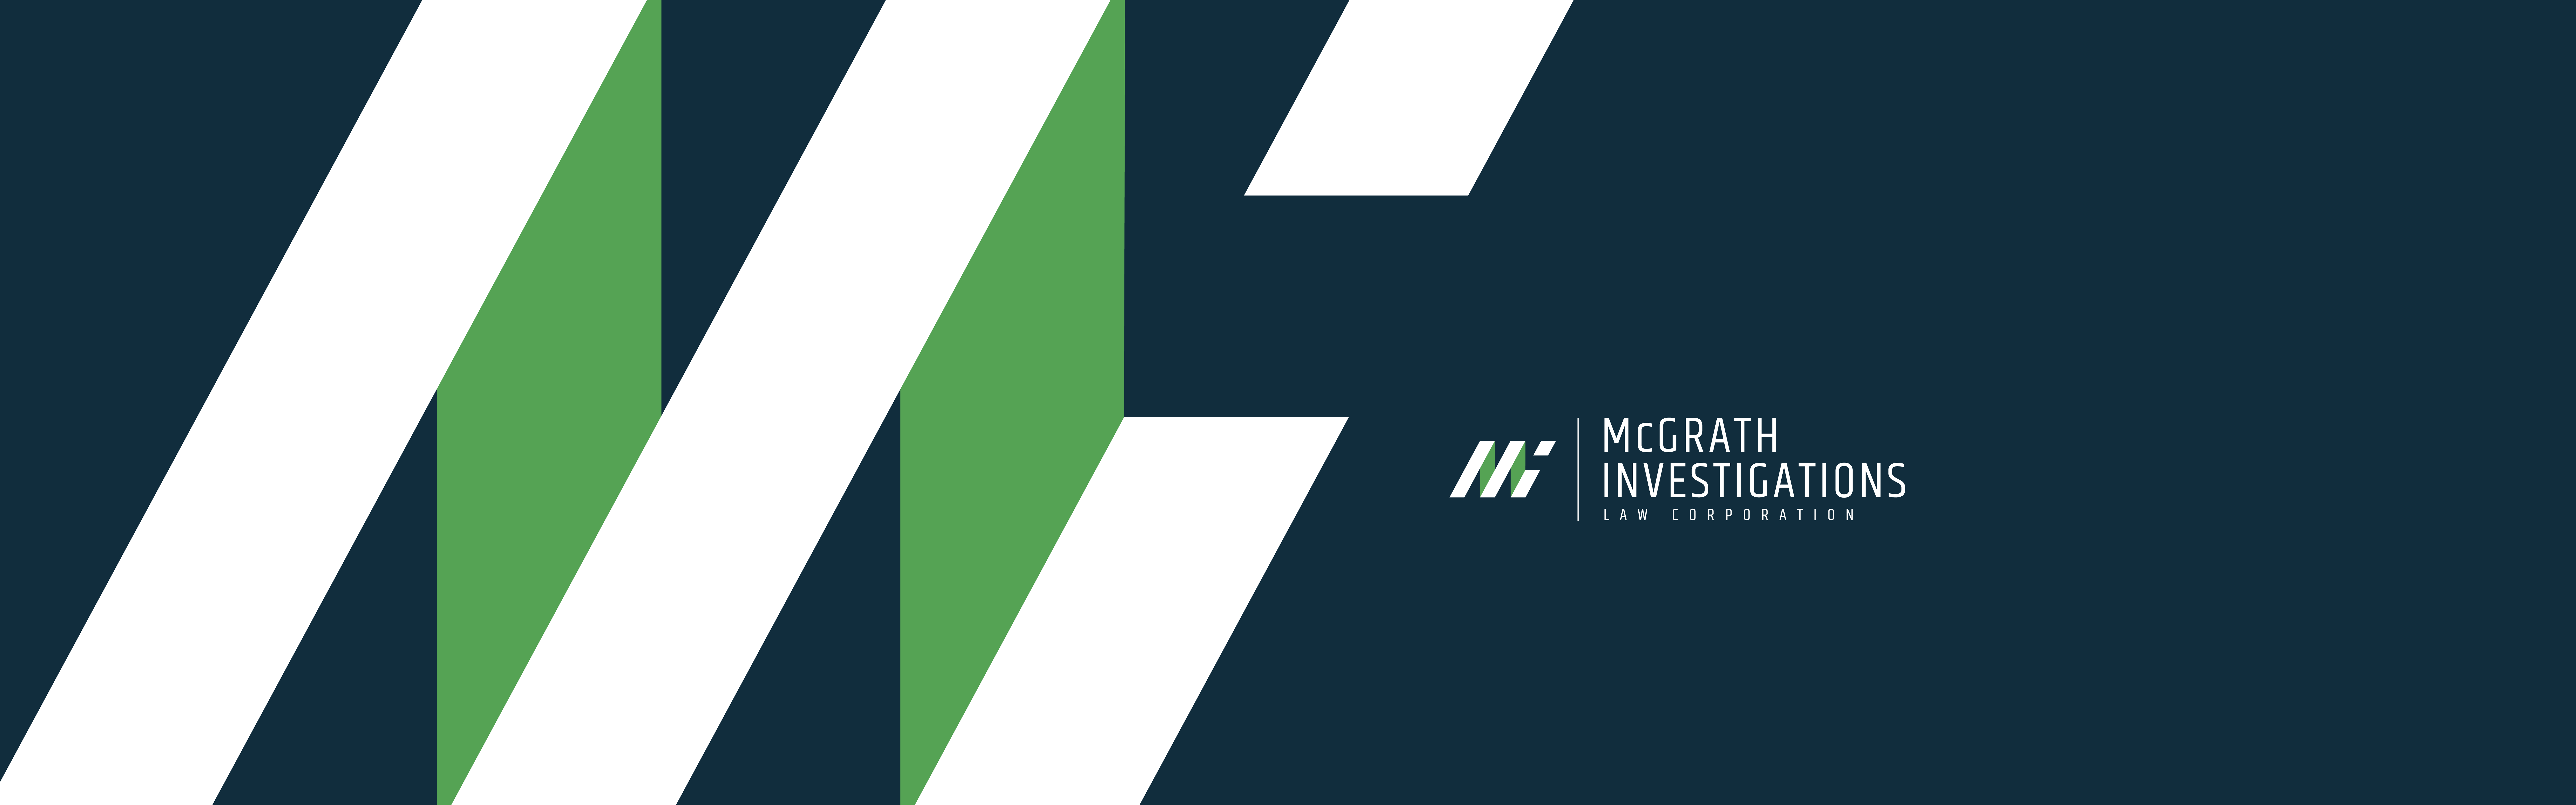 Dark blue background with angled white and green stripes on the left side and the logo for McGrath Investigations on the right side.